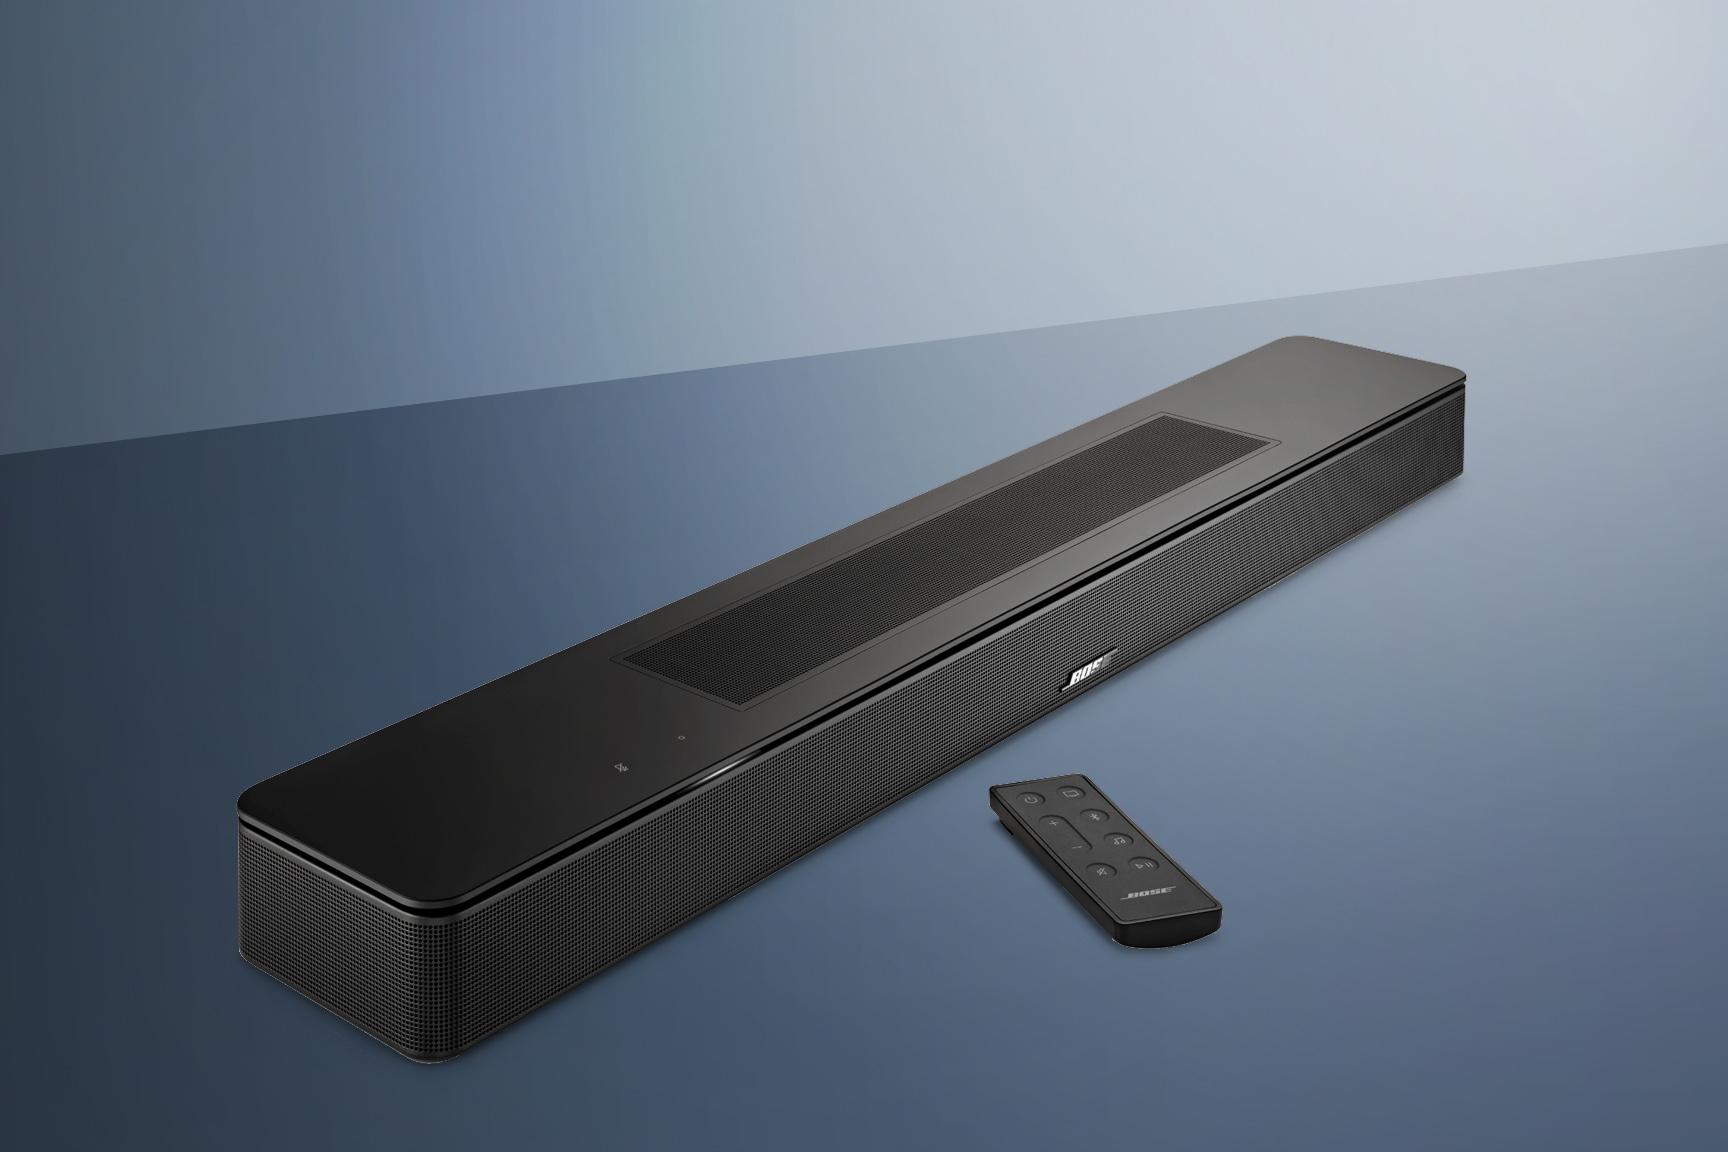 Bose Smart Soundbar 600 review: What you want versus what you need